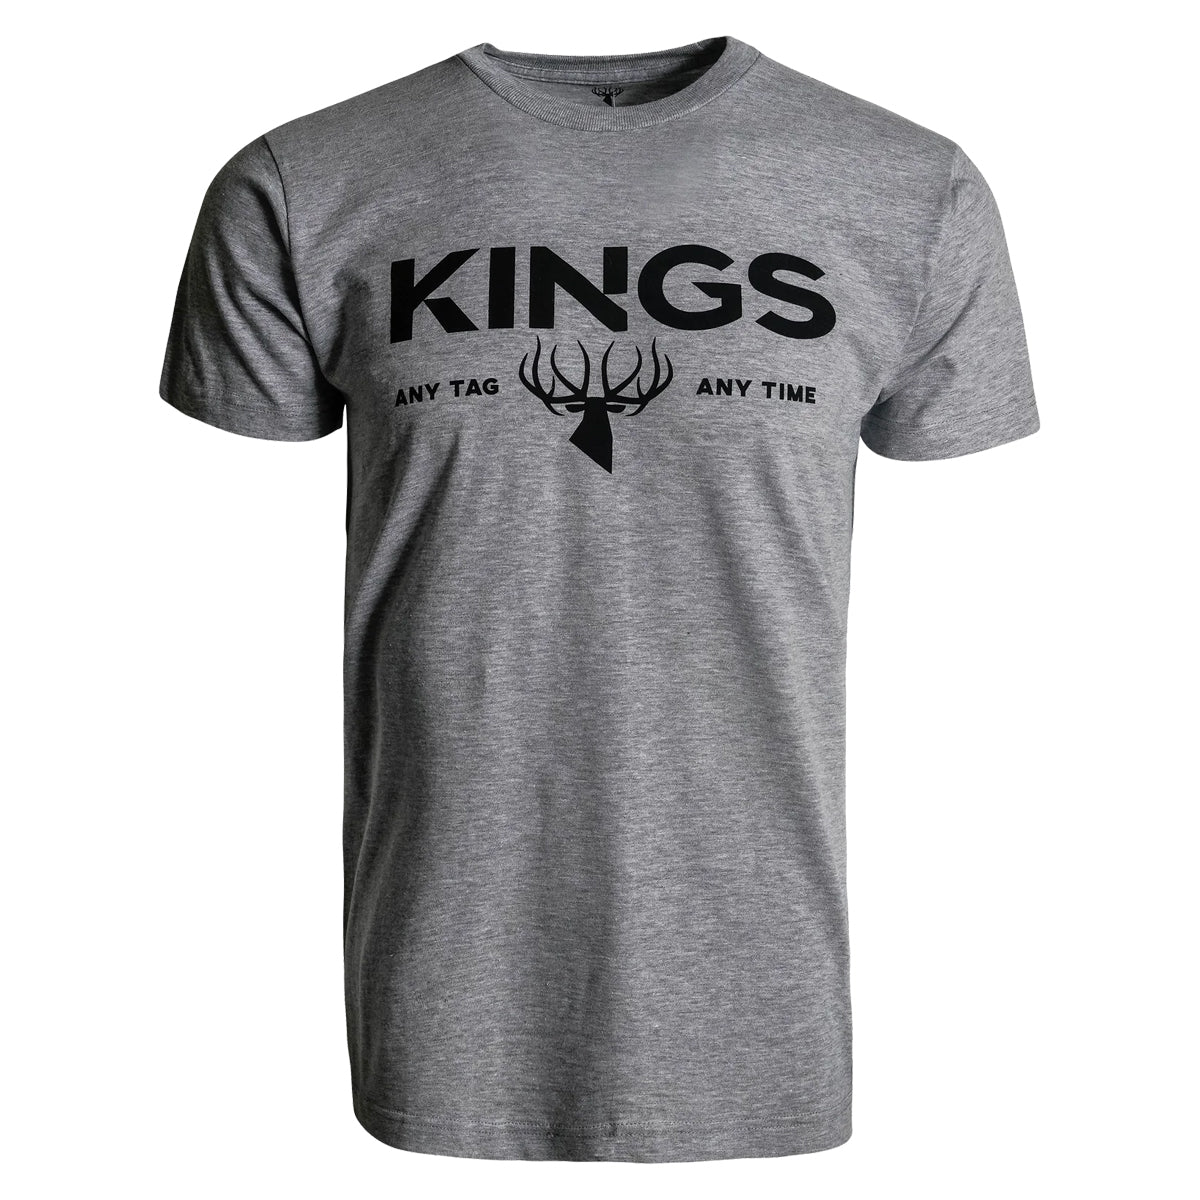 King's Any Tag Any Time Tee in  by GOHUNT | King's - GOHUNT Shop